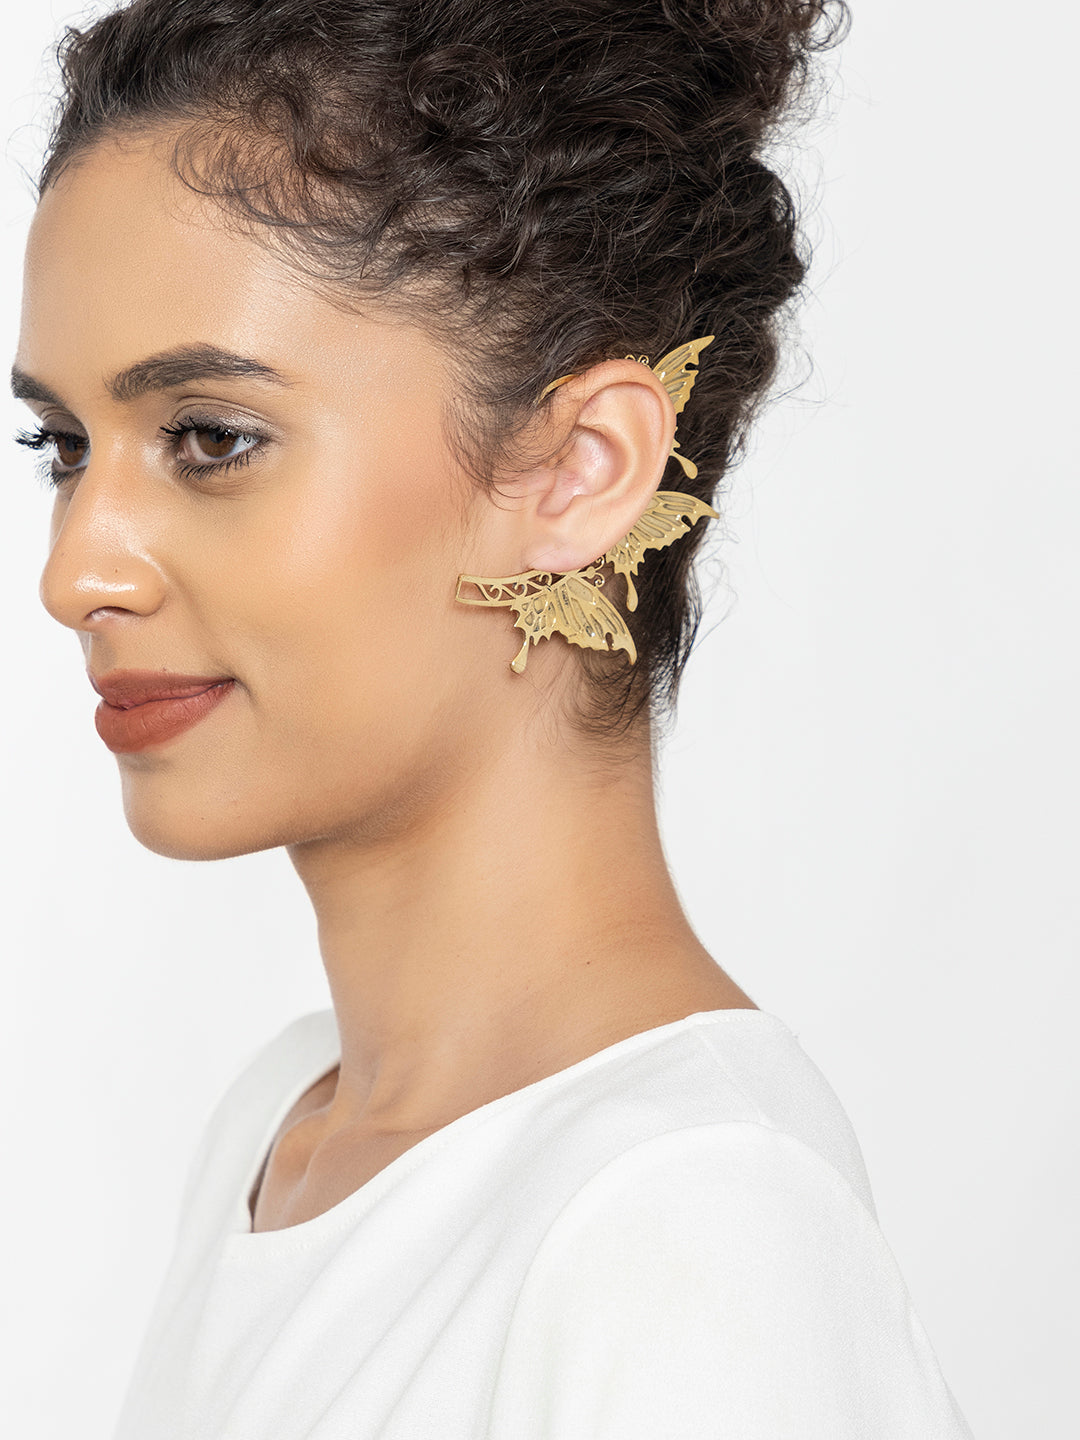 Stylish Party Ear Cuff Earrings - Winged Butterfly Gold and Silver-Toned Contemporary Statement Earrings for Women by Studio One Love